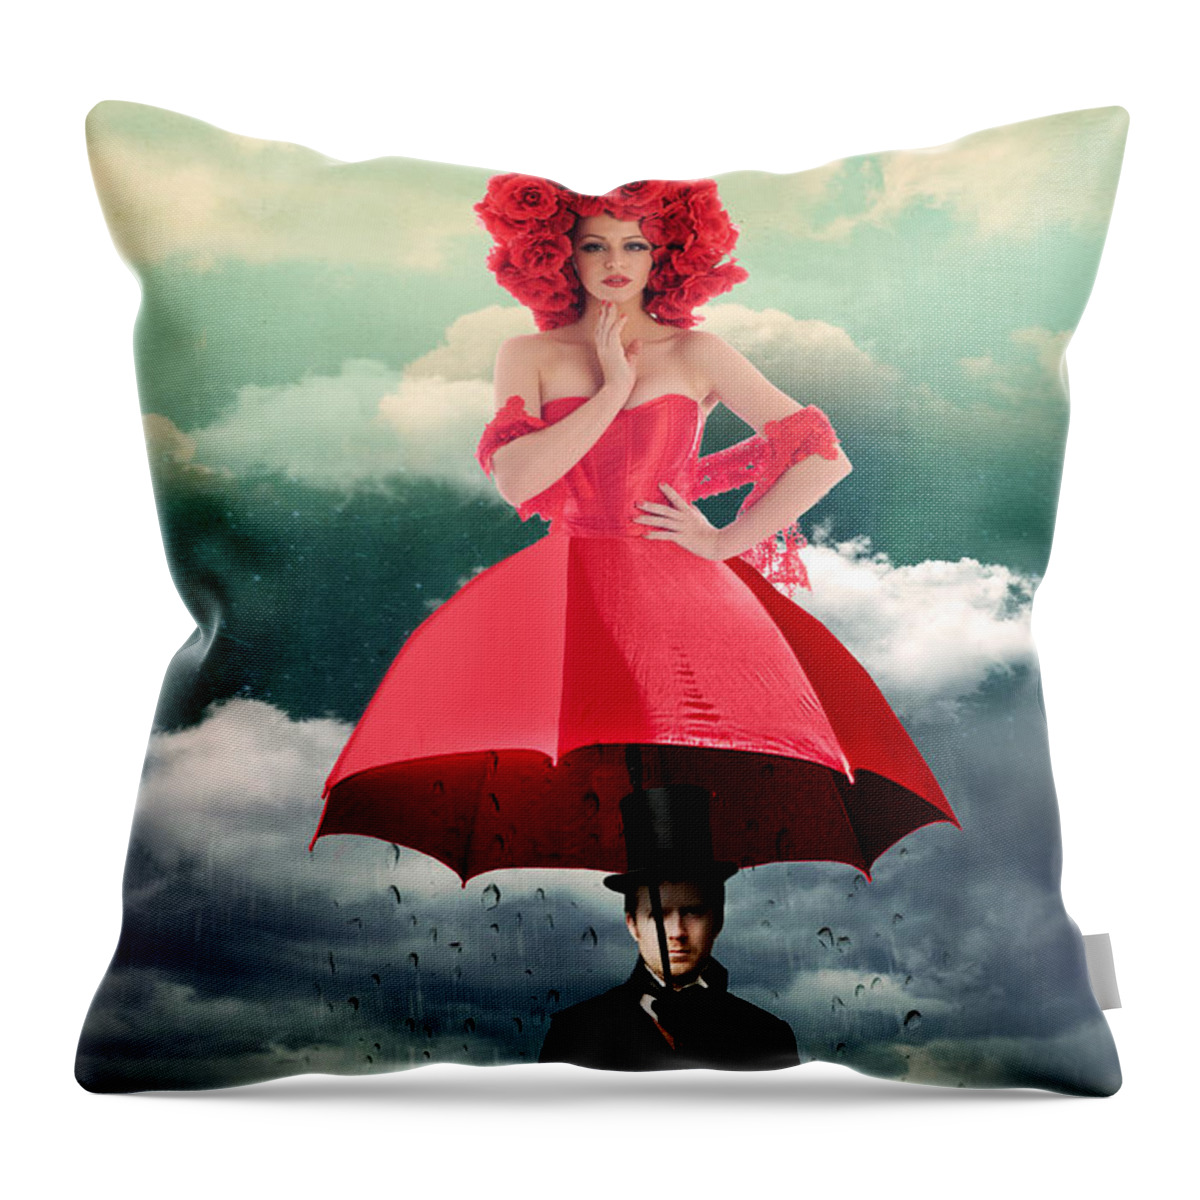 Photomanipulation Throw Pillow featuring the photograph Red Umbrella by Juli Scalzi